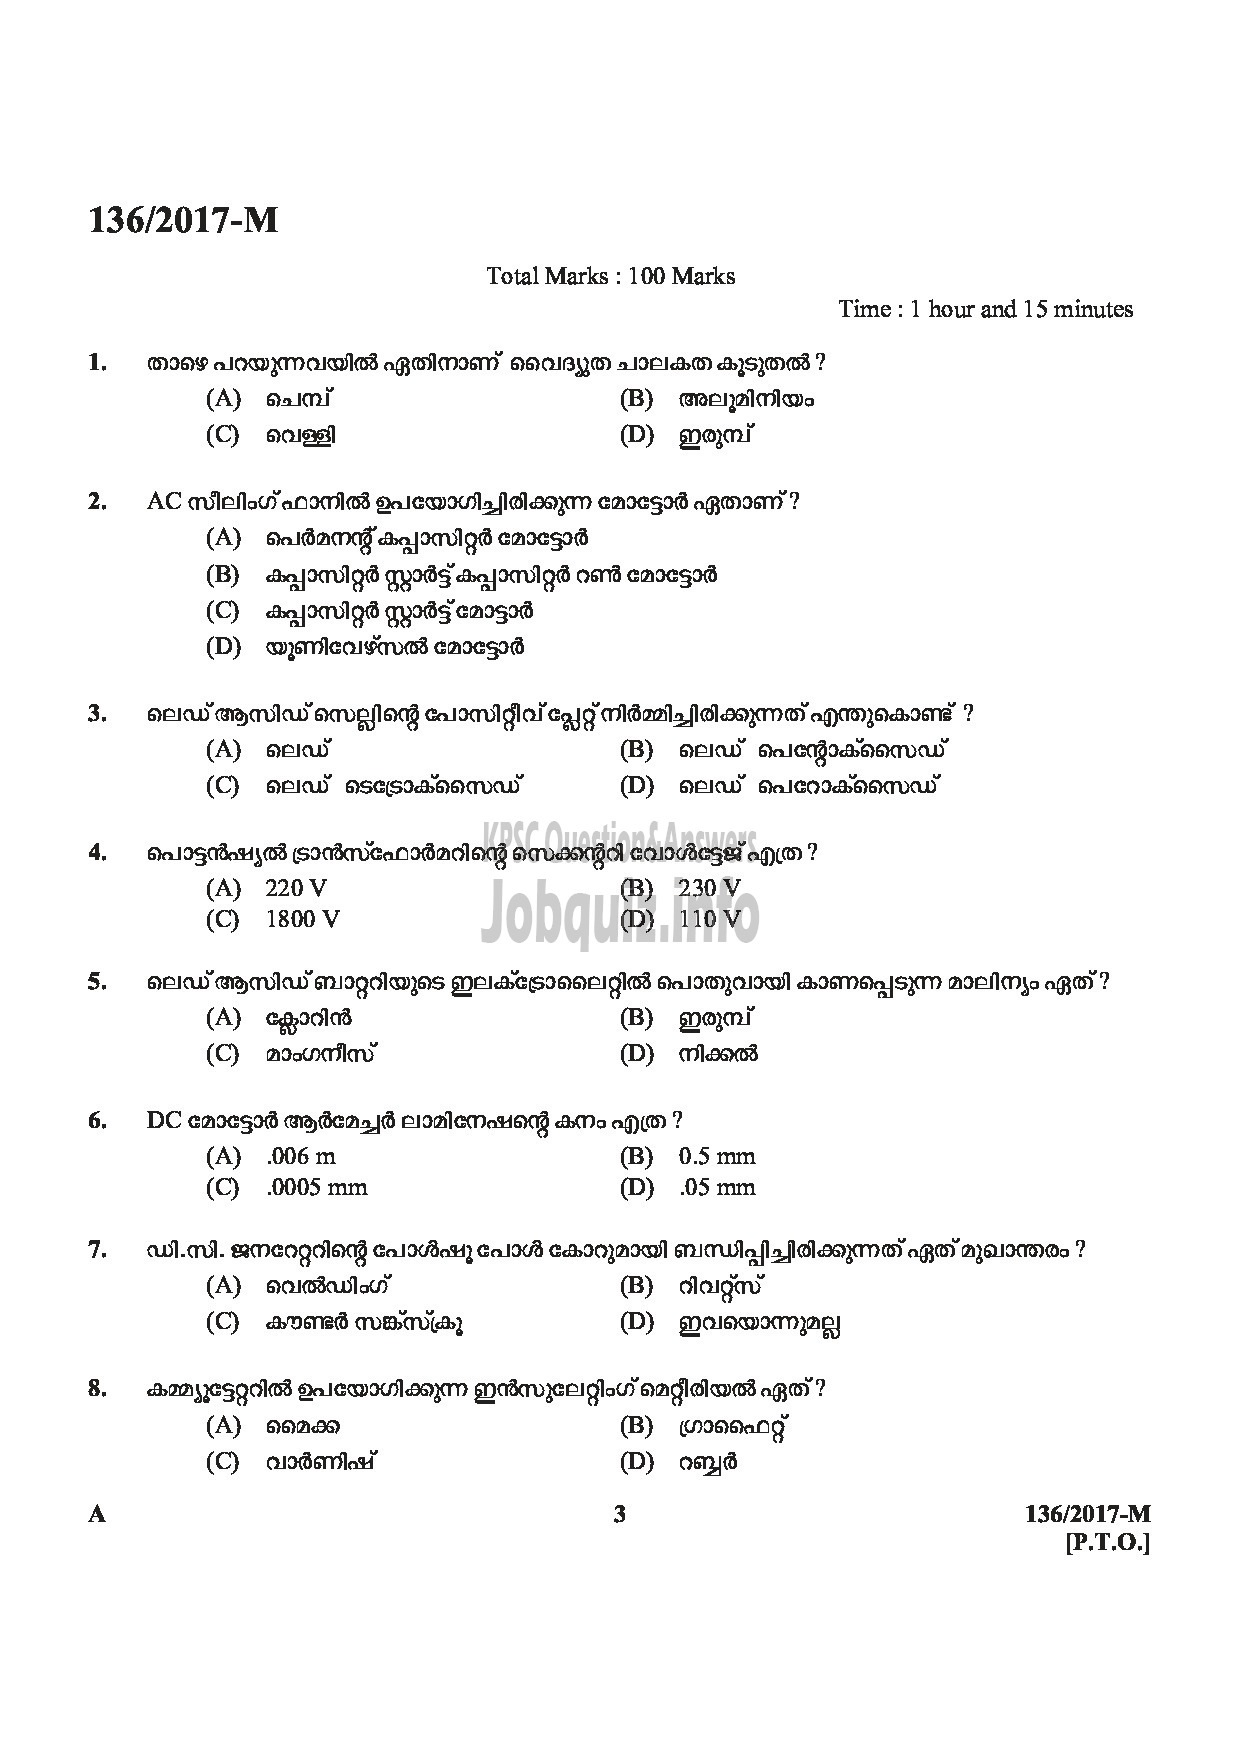 Kerala PSC Question Paper - METER READER/SPOT BILLER SPECIAL RECRUITMENT FROM AMONG ST ONLY MEDIUM OF QUESTION MALAYALAM-3